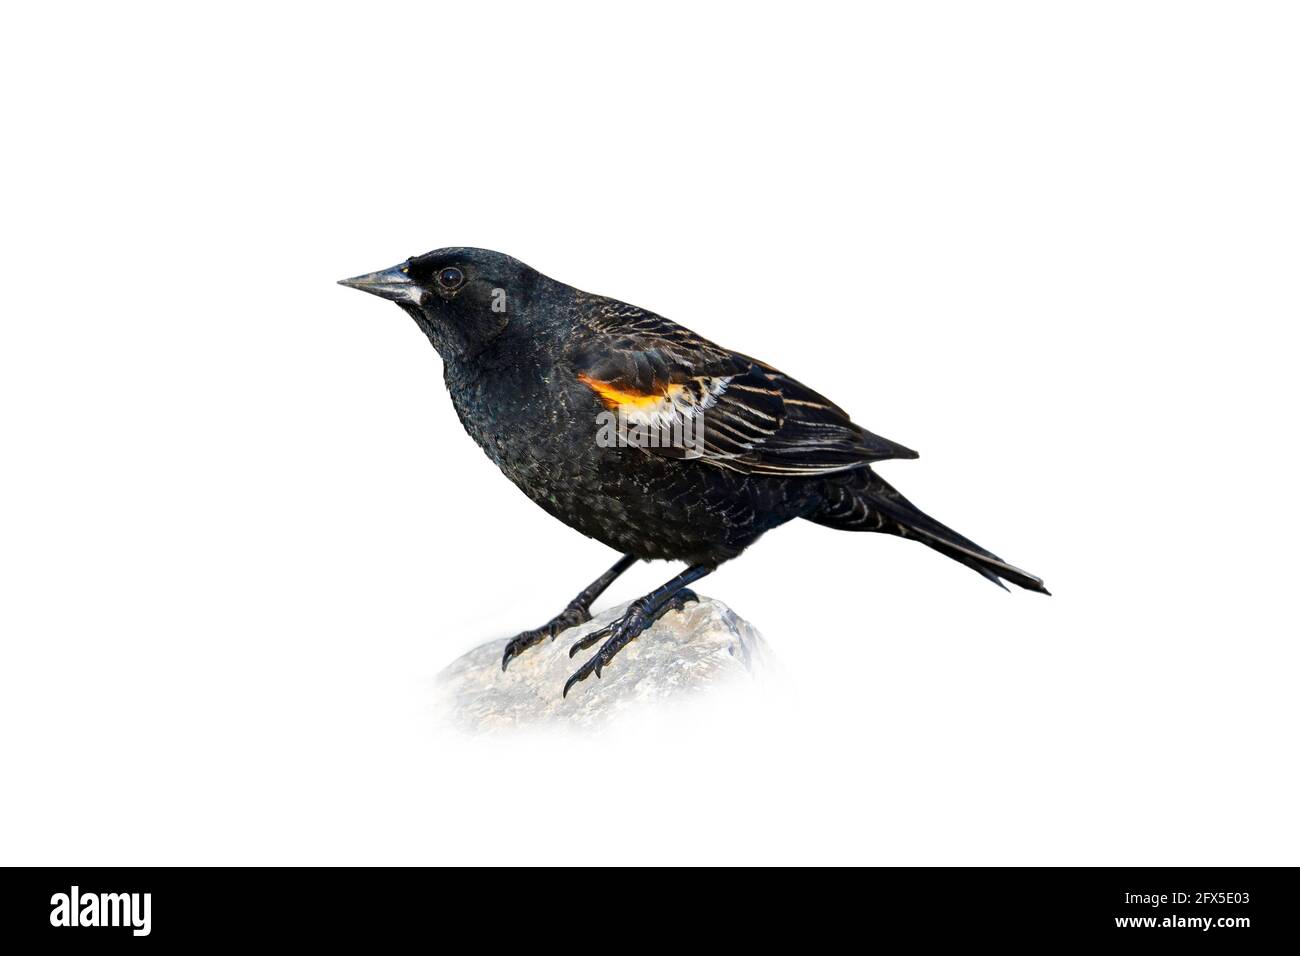 Red-winged Blackbird, Cut out on a White Background, (Agelaius phoeniceus), Young, Male, Bird Cut Out Stock Photo